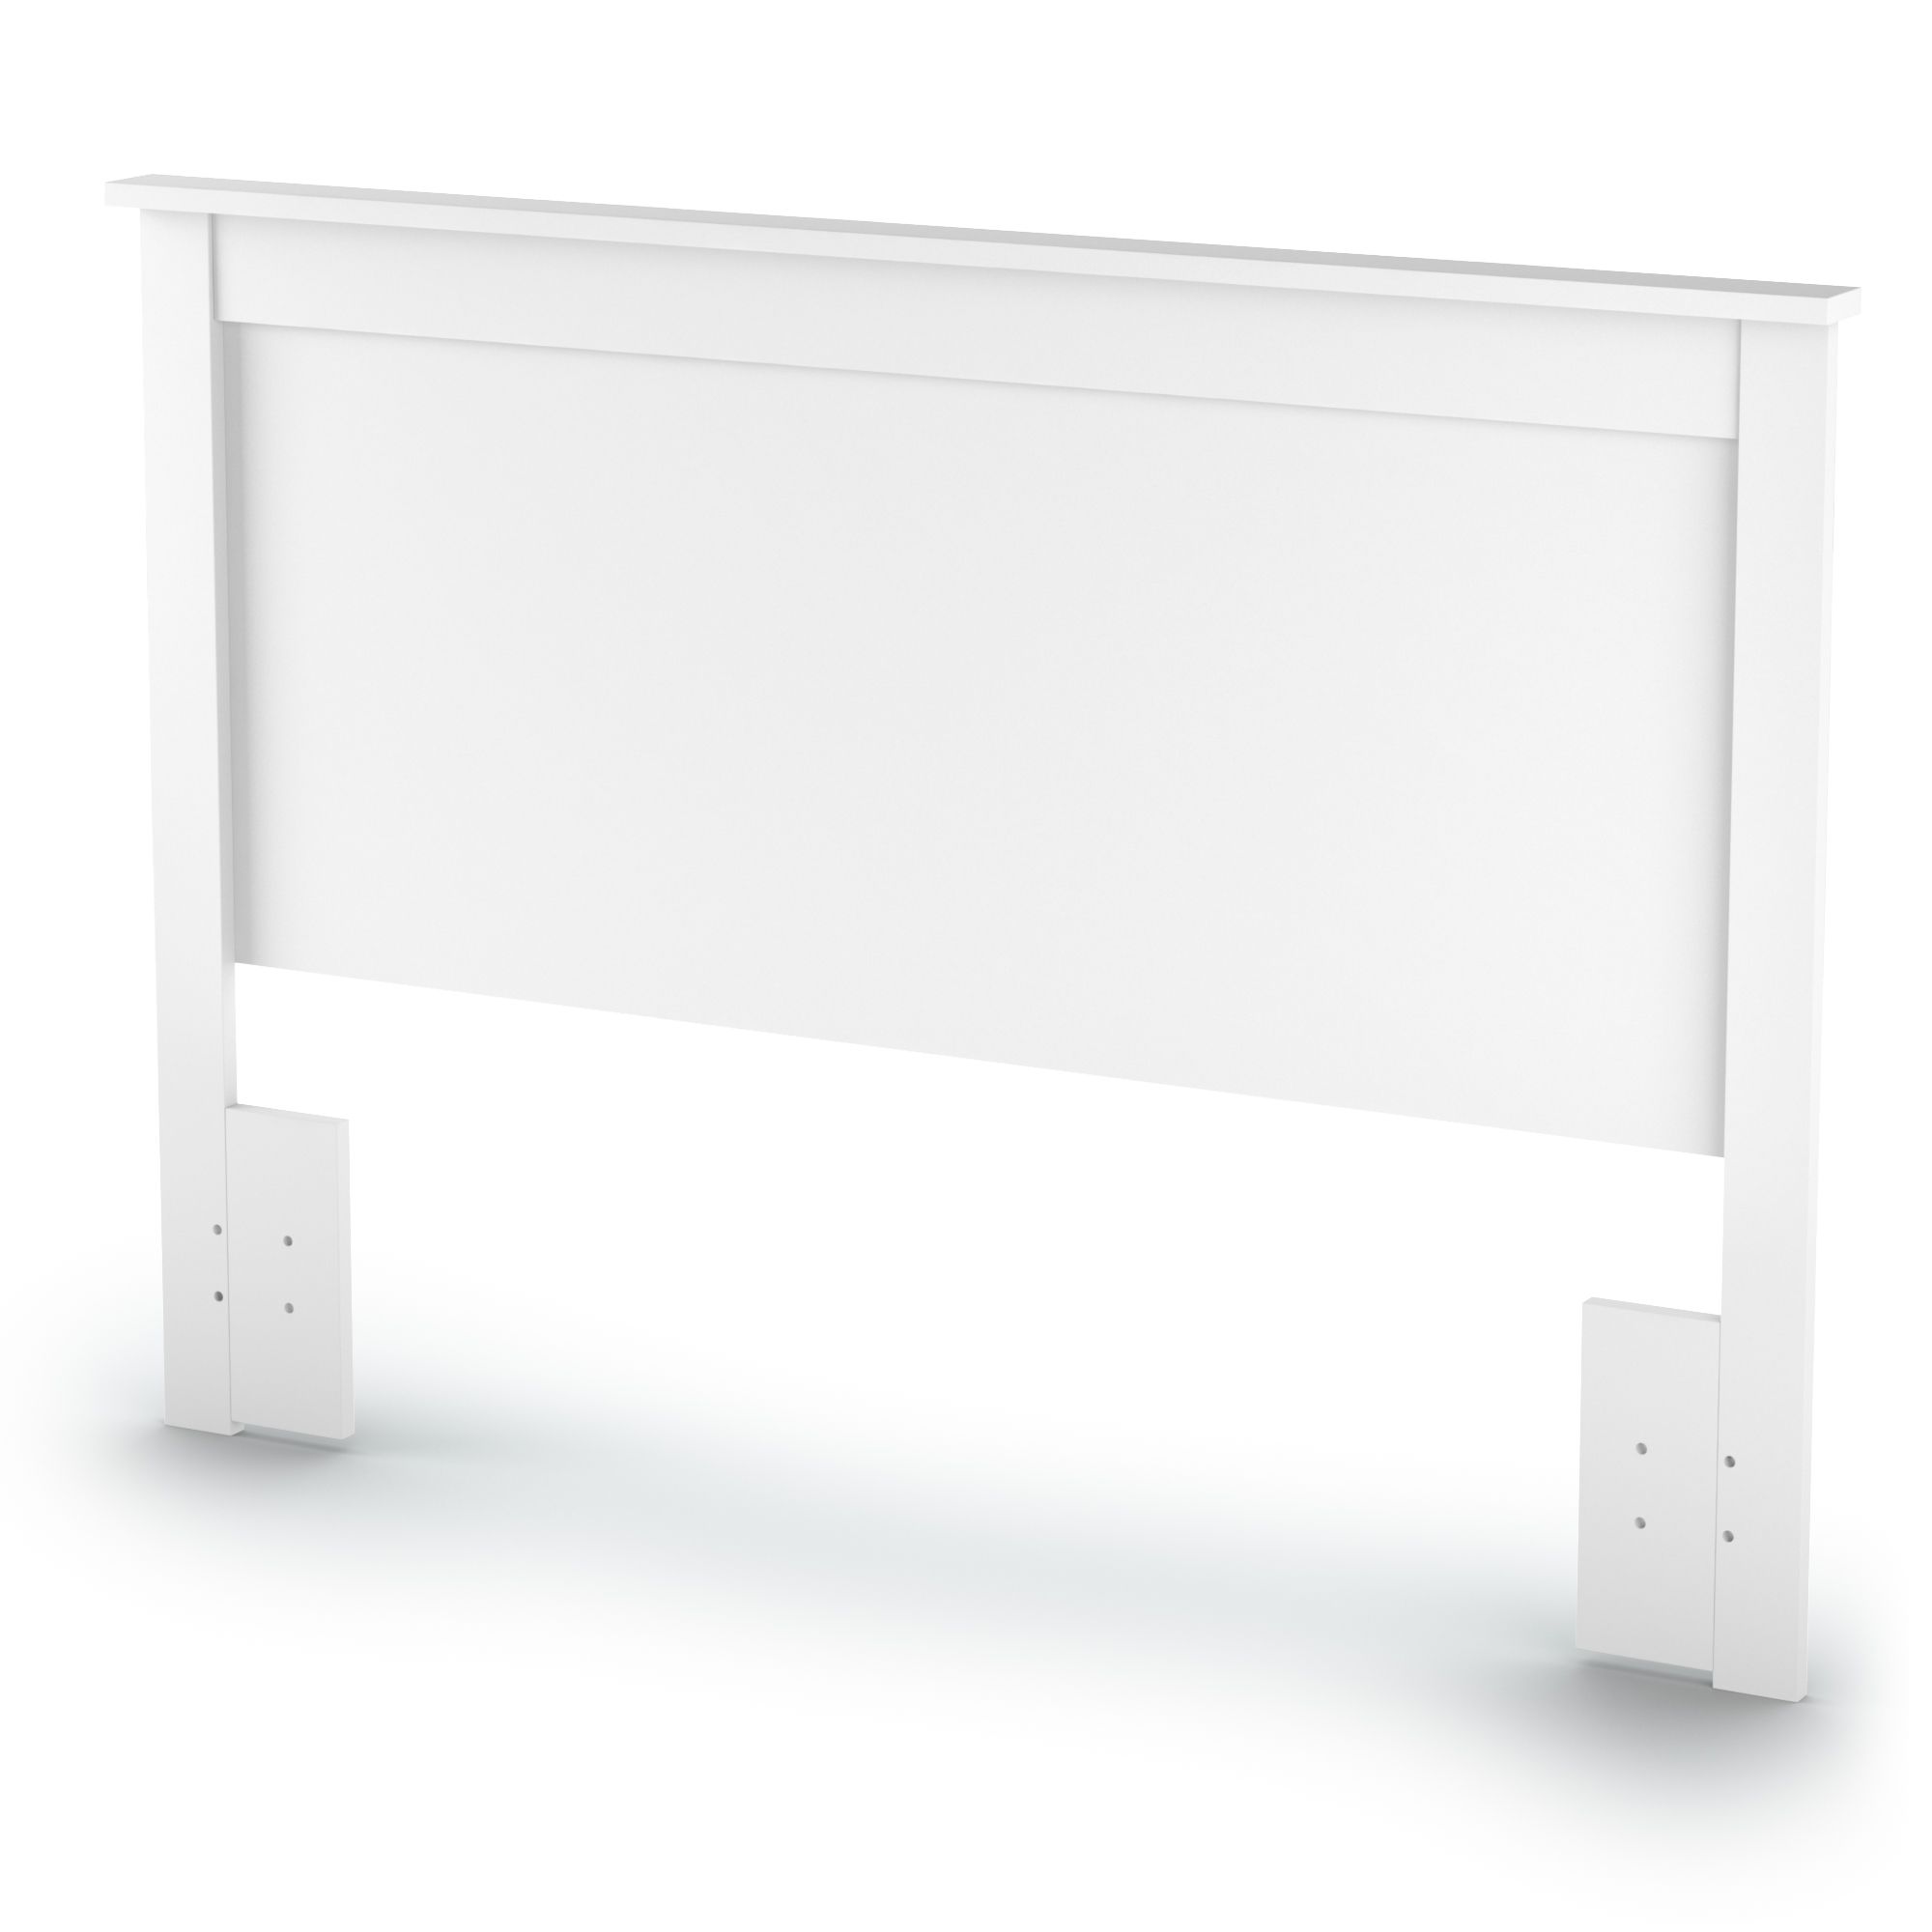 South S Vito Full Queen Headboard, White Wooden Queen Size Headboards